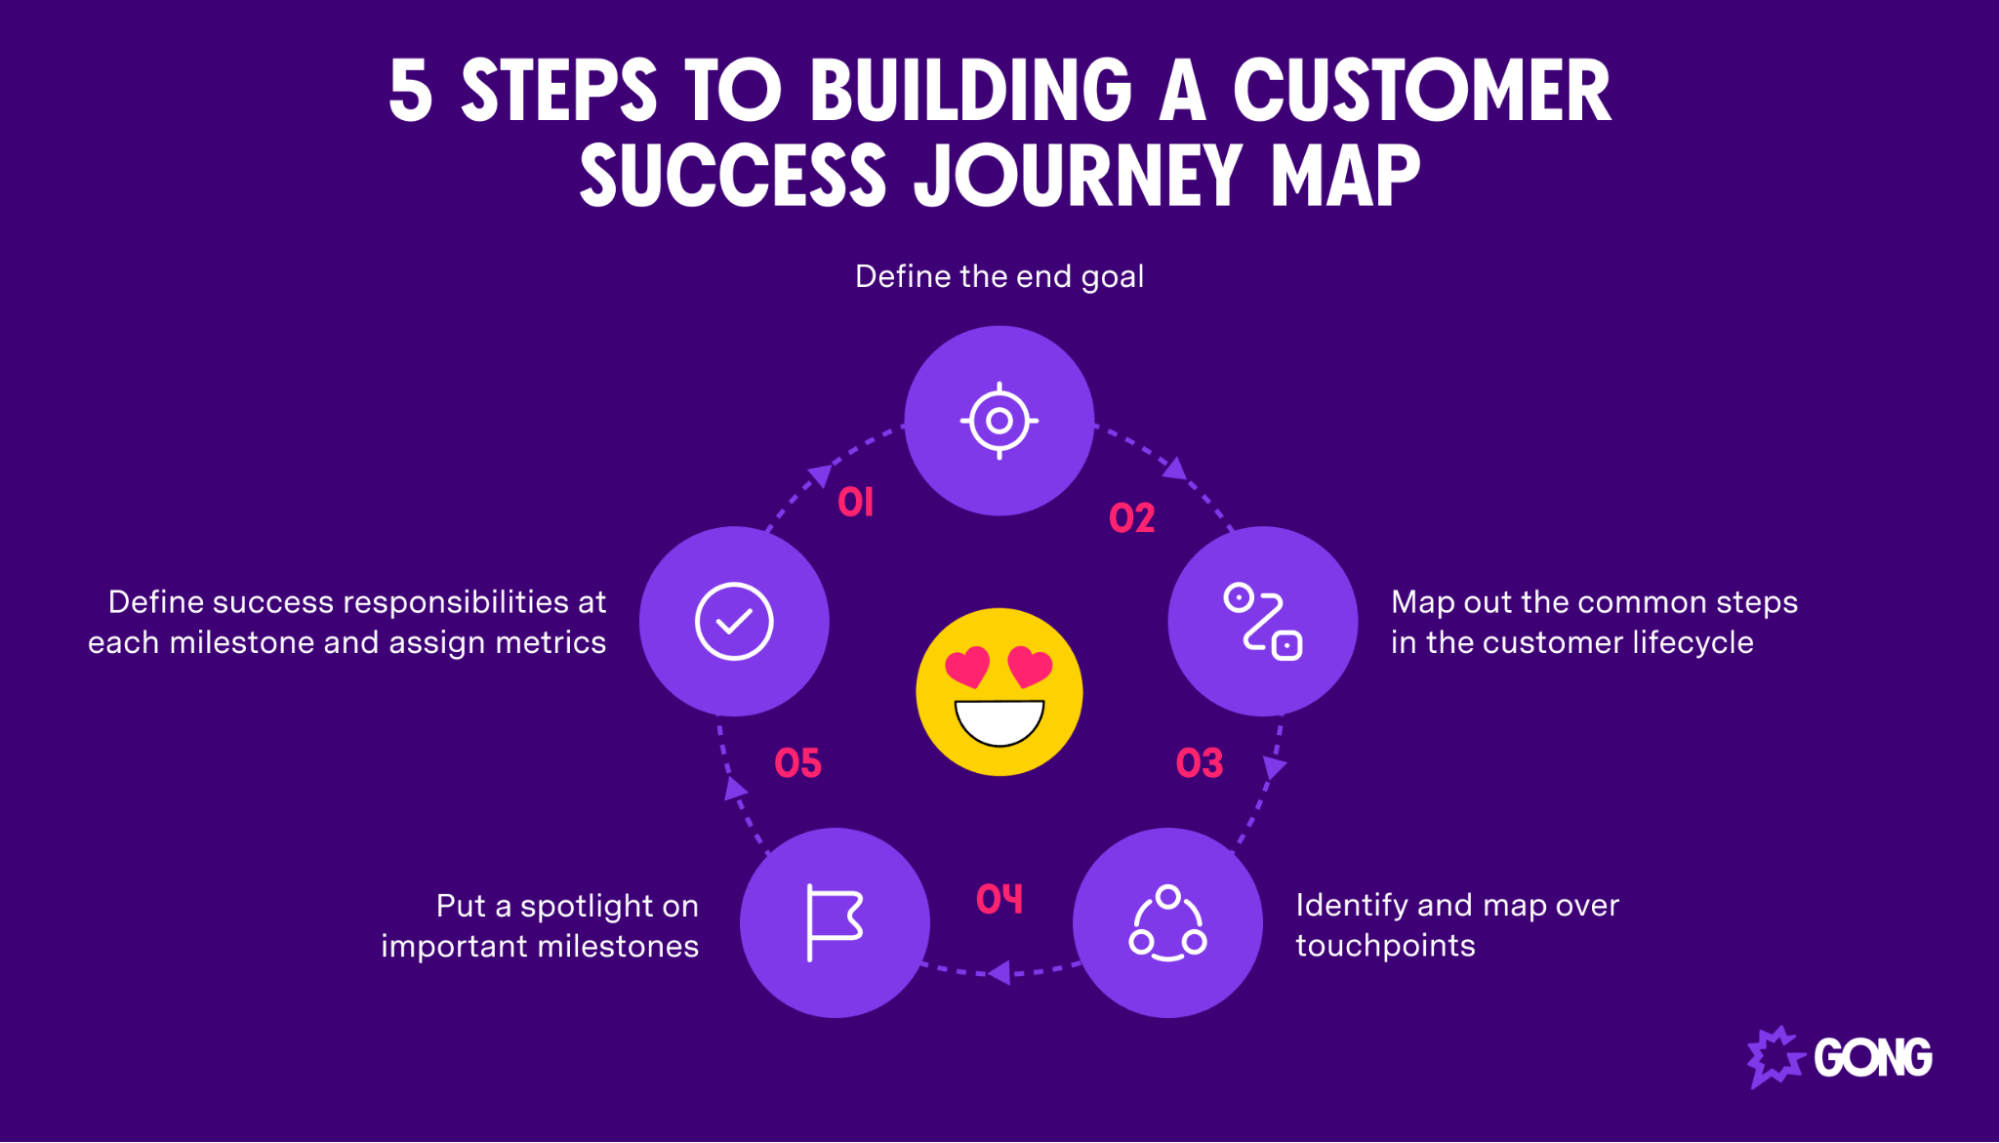 How to build a customer success journey map